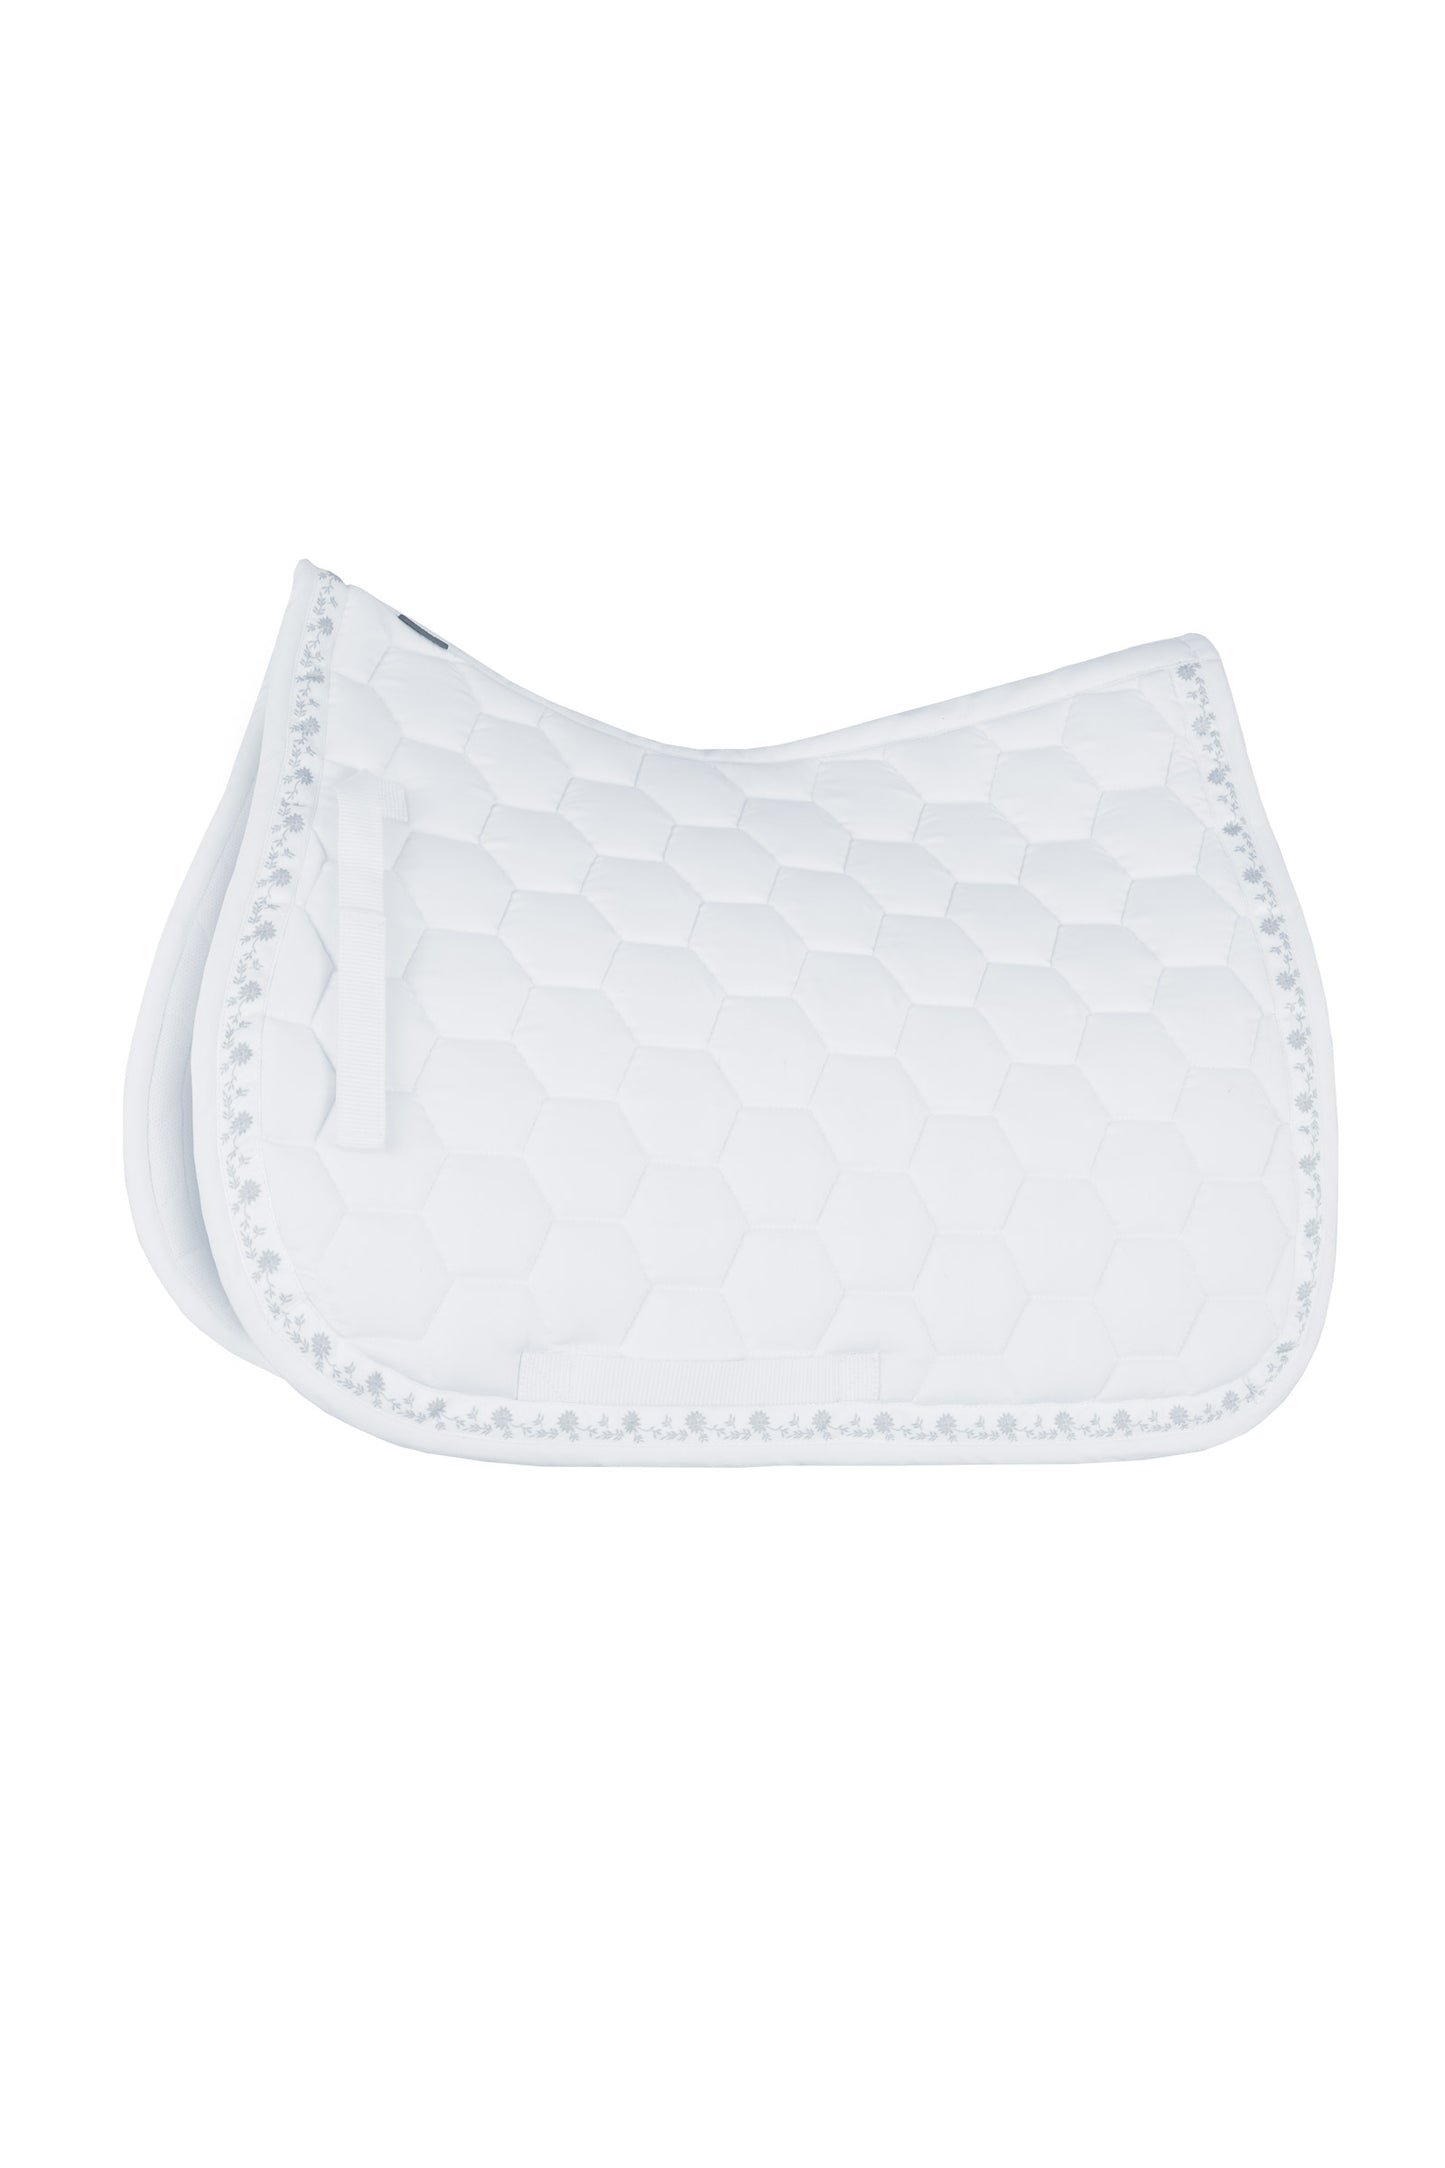 Horze Pony/Horse White Kaitlin All Purpose Saddle Pad w/ Flower Print Piping